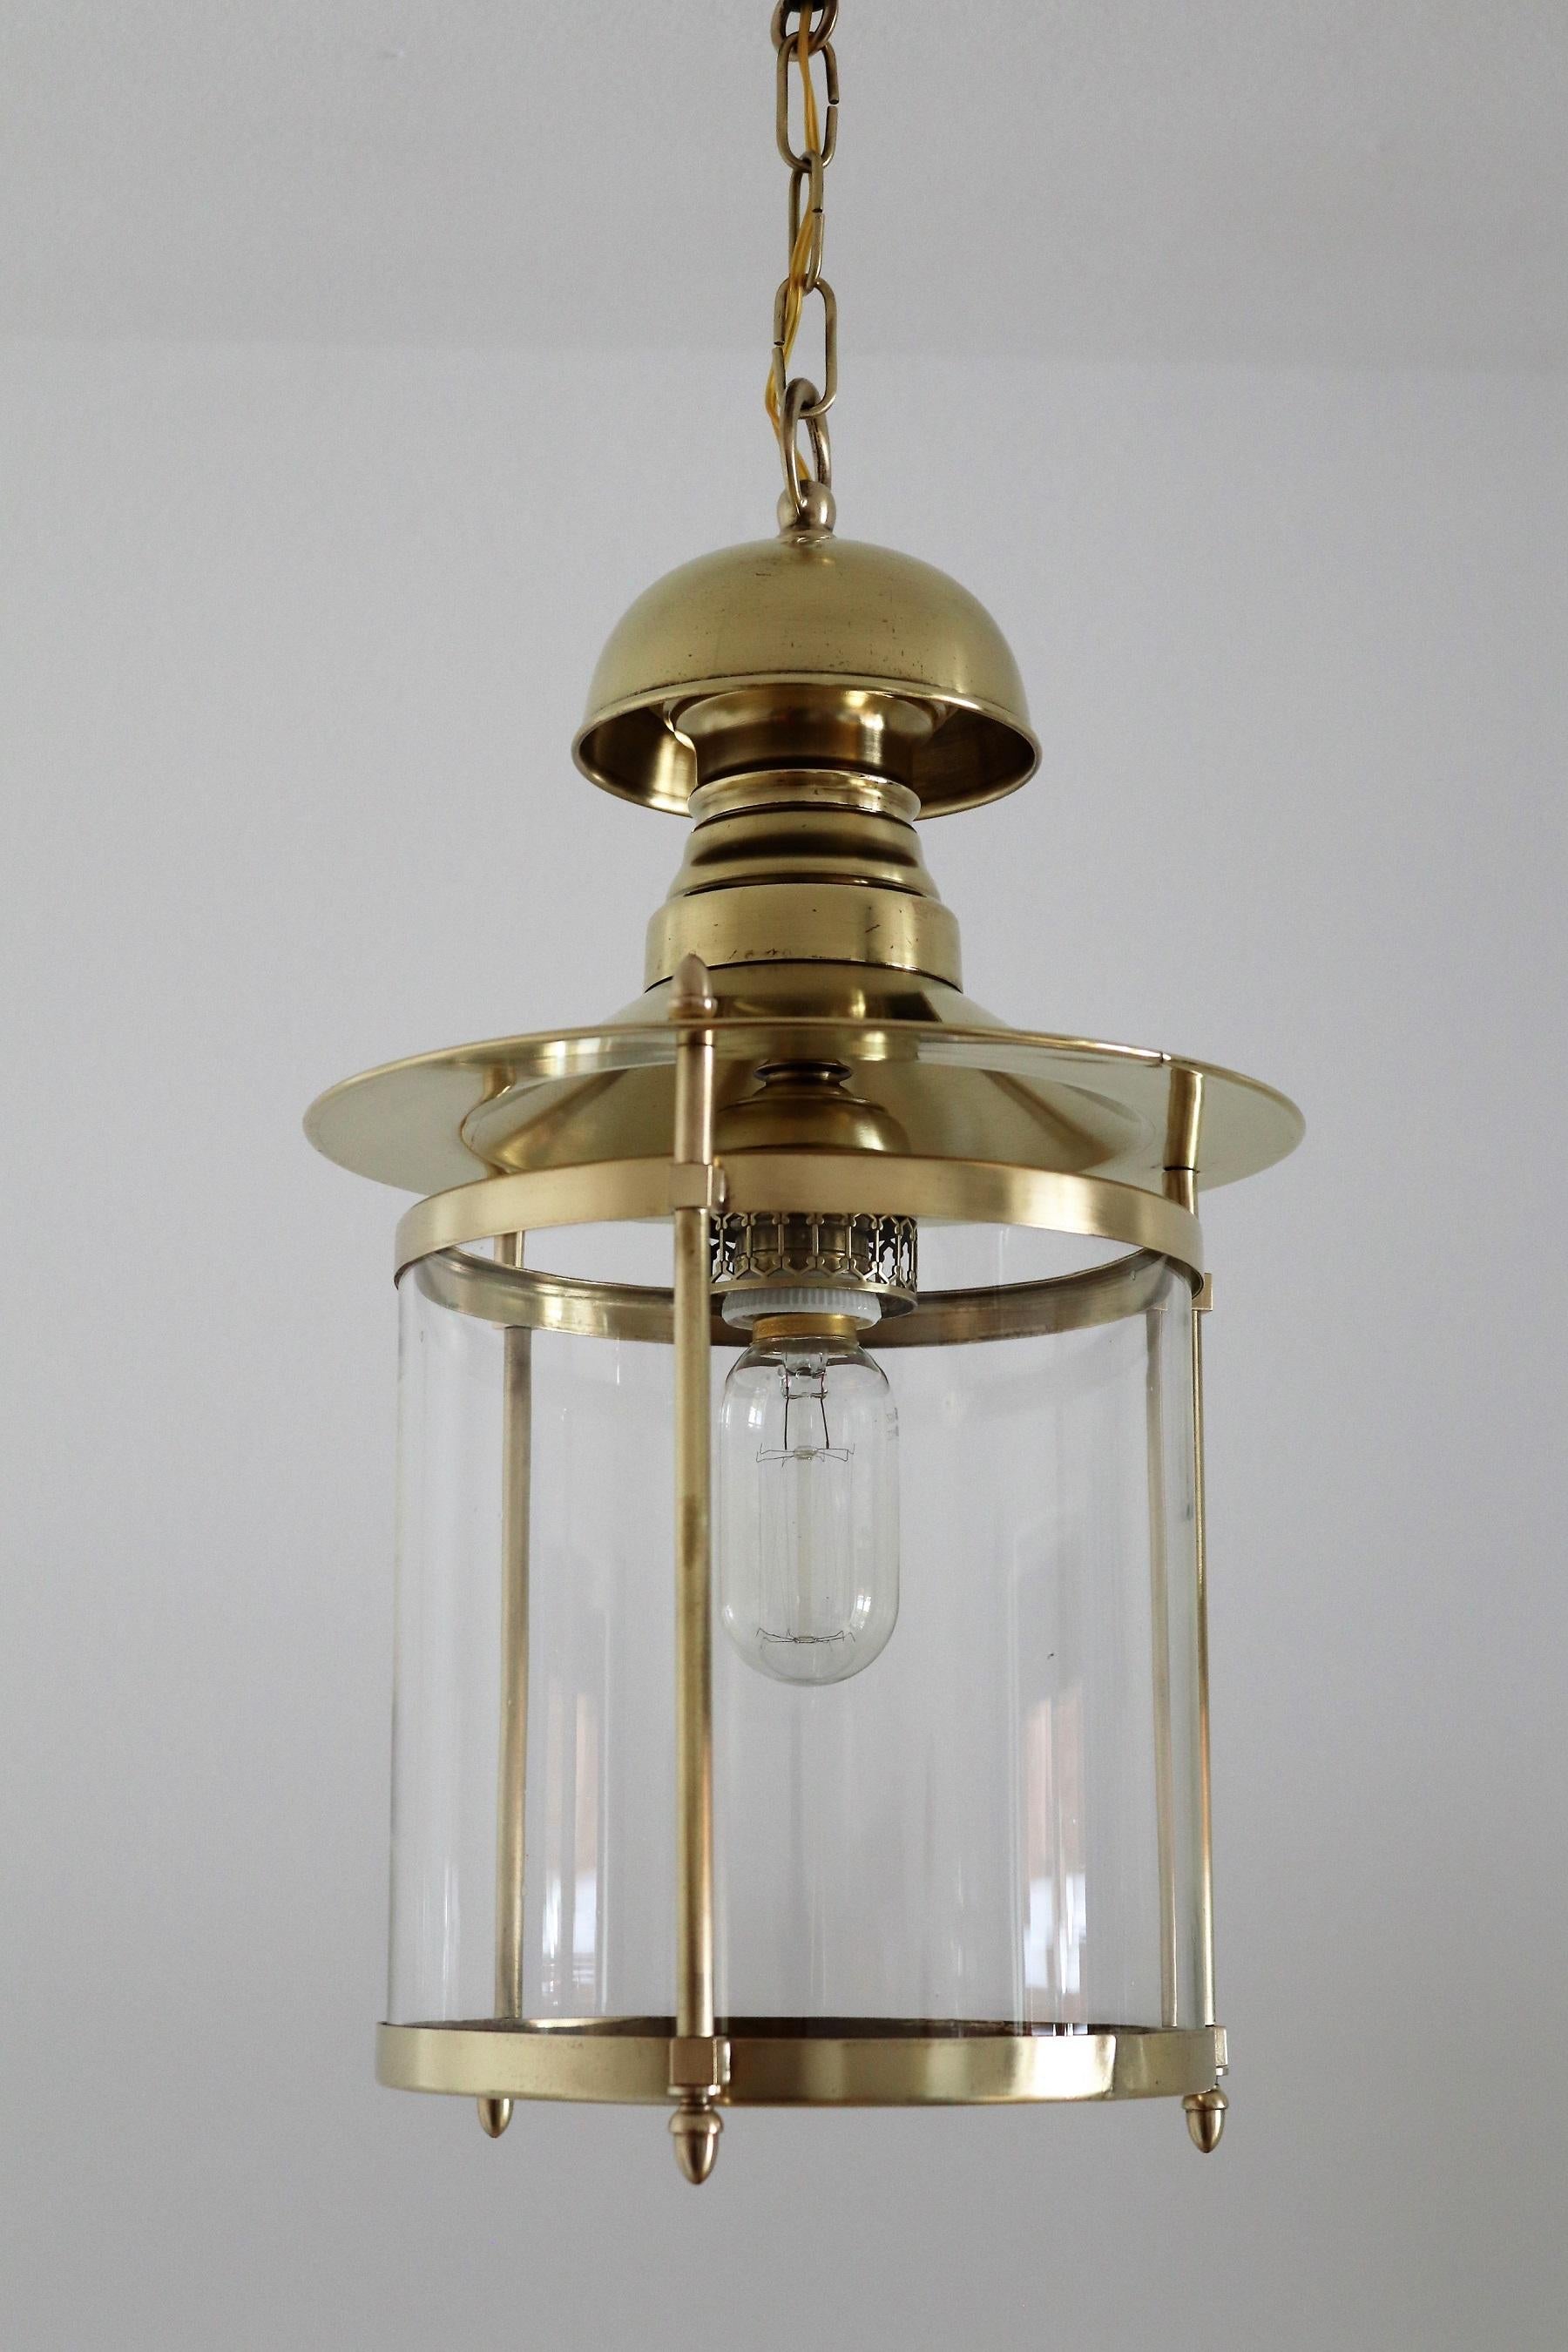 Italian Midcentury Brass and Glass Pendant Lamp or Lantern, 1970s For Sale 6